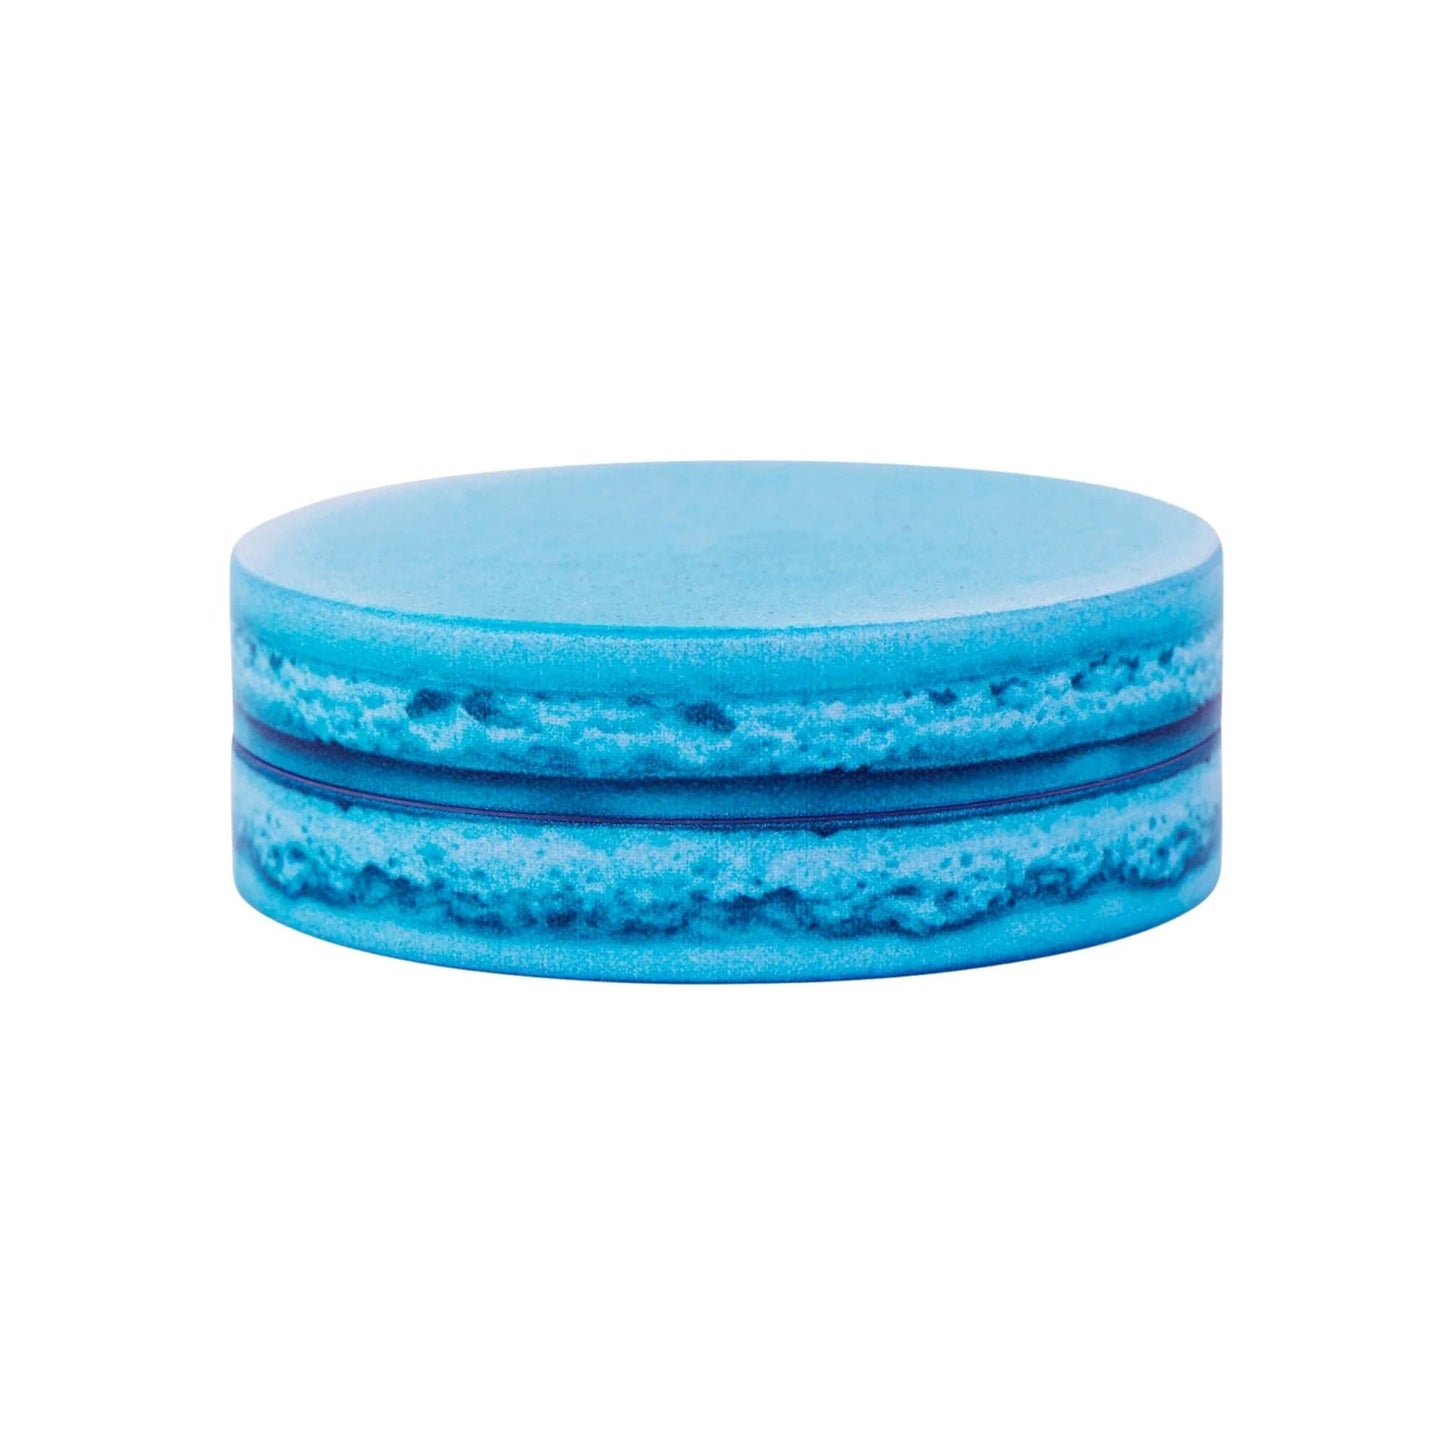 V-Syndicate Blueberry Macaron / Metal SharpShred Dine-In 2 Piece Grinders